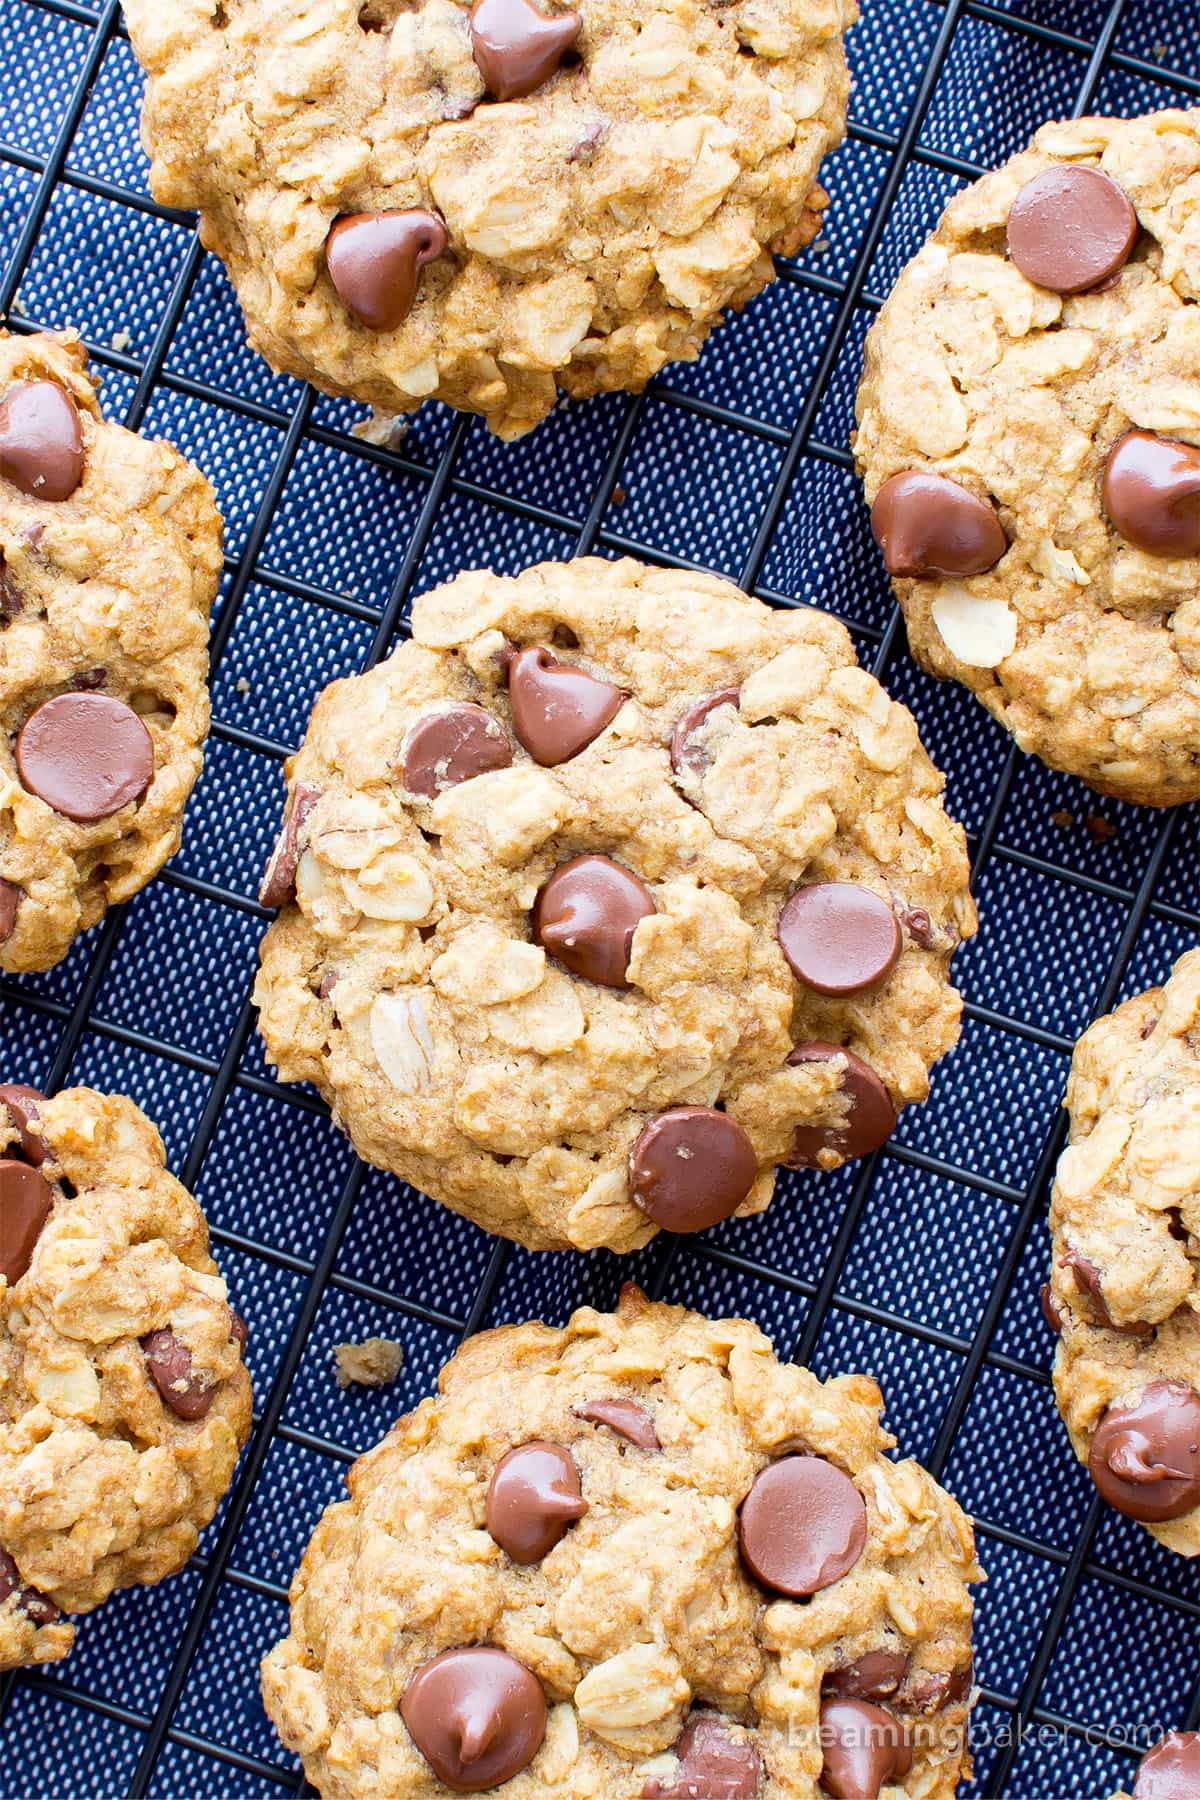 Gluten Free Vegan Oatmeal Chocolate Chip Cookies (GF): a simple vegan oatmeal chocolate chip cookies recipe that yields soft & buttery oatmeal cookies packed with melty chocolate chips! Dairy-Free, Refined Sugar-Free. #OatmealCookies #GlutenFree #Vegan #ChocolateChip | Recipe at BeamingBaker.com